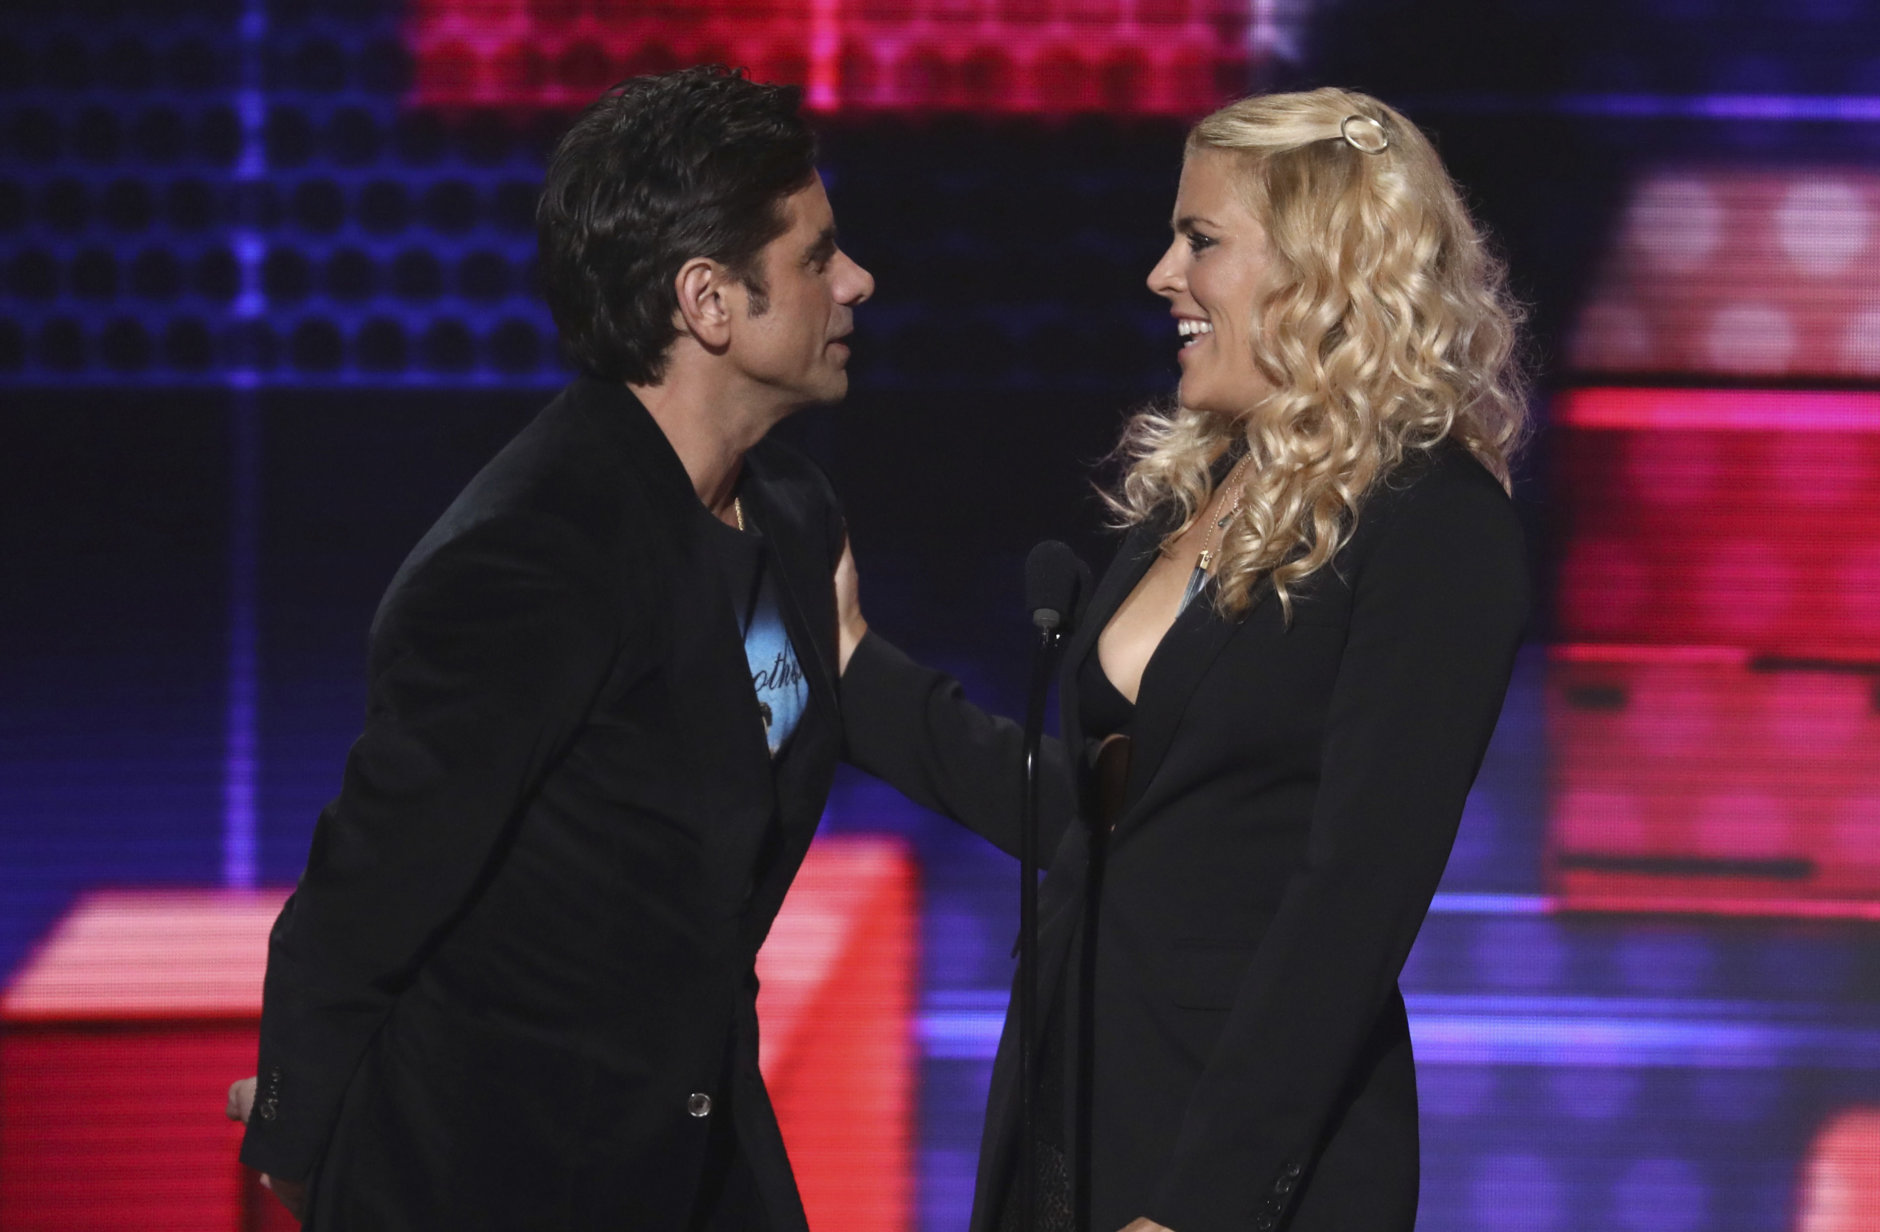 John Stamos, left, and Busy Phillips present the award for favorite male soul/R&amp;B artist at the American Music Awards on Tuesday, Oct. 9, 2018, at the Microsoft Theater in Los Angeles. (Photo by Matt Sayles/Invision/AP)